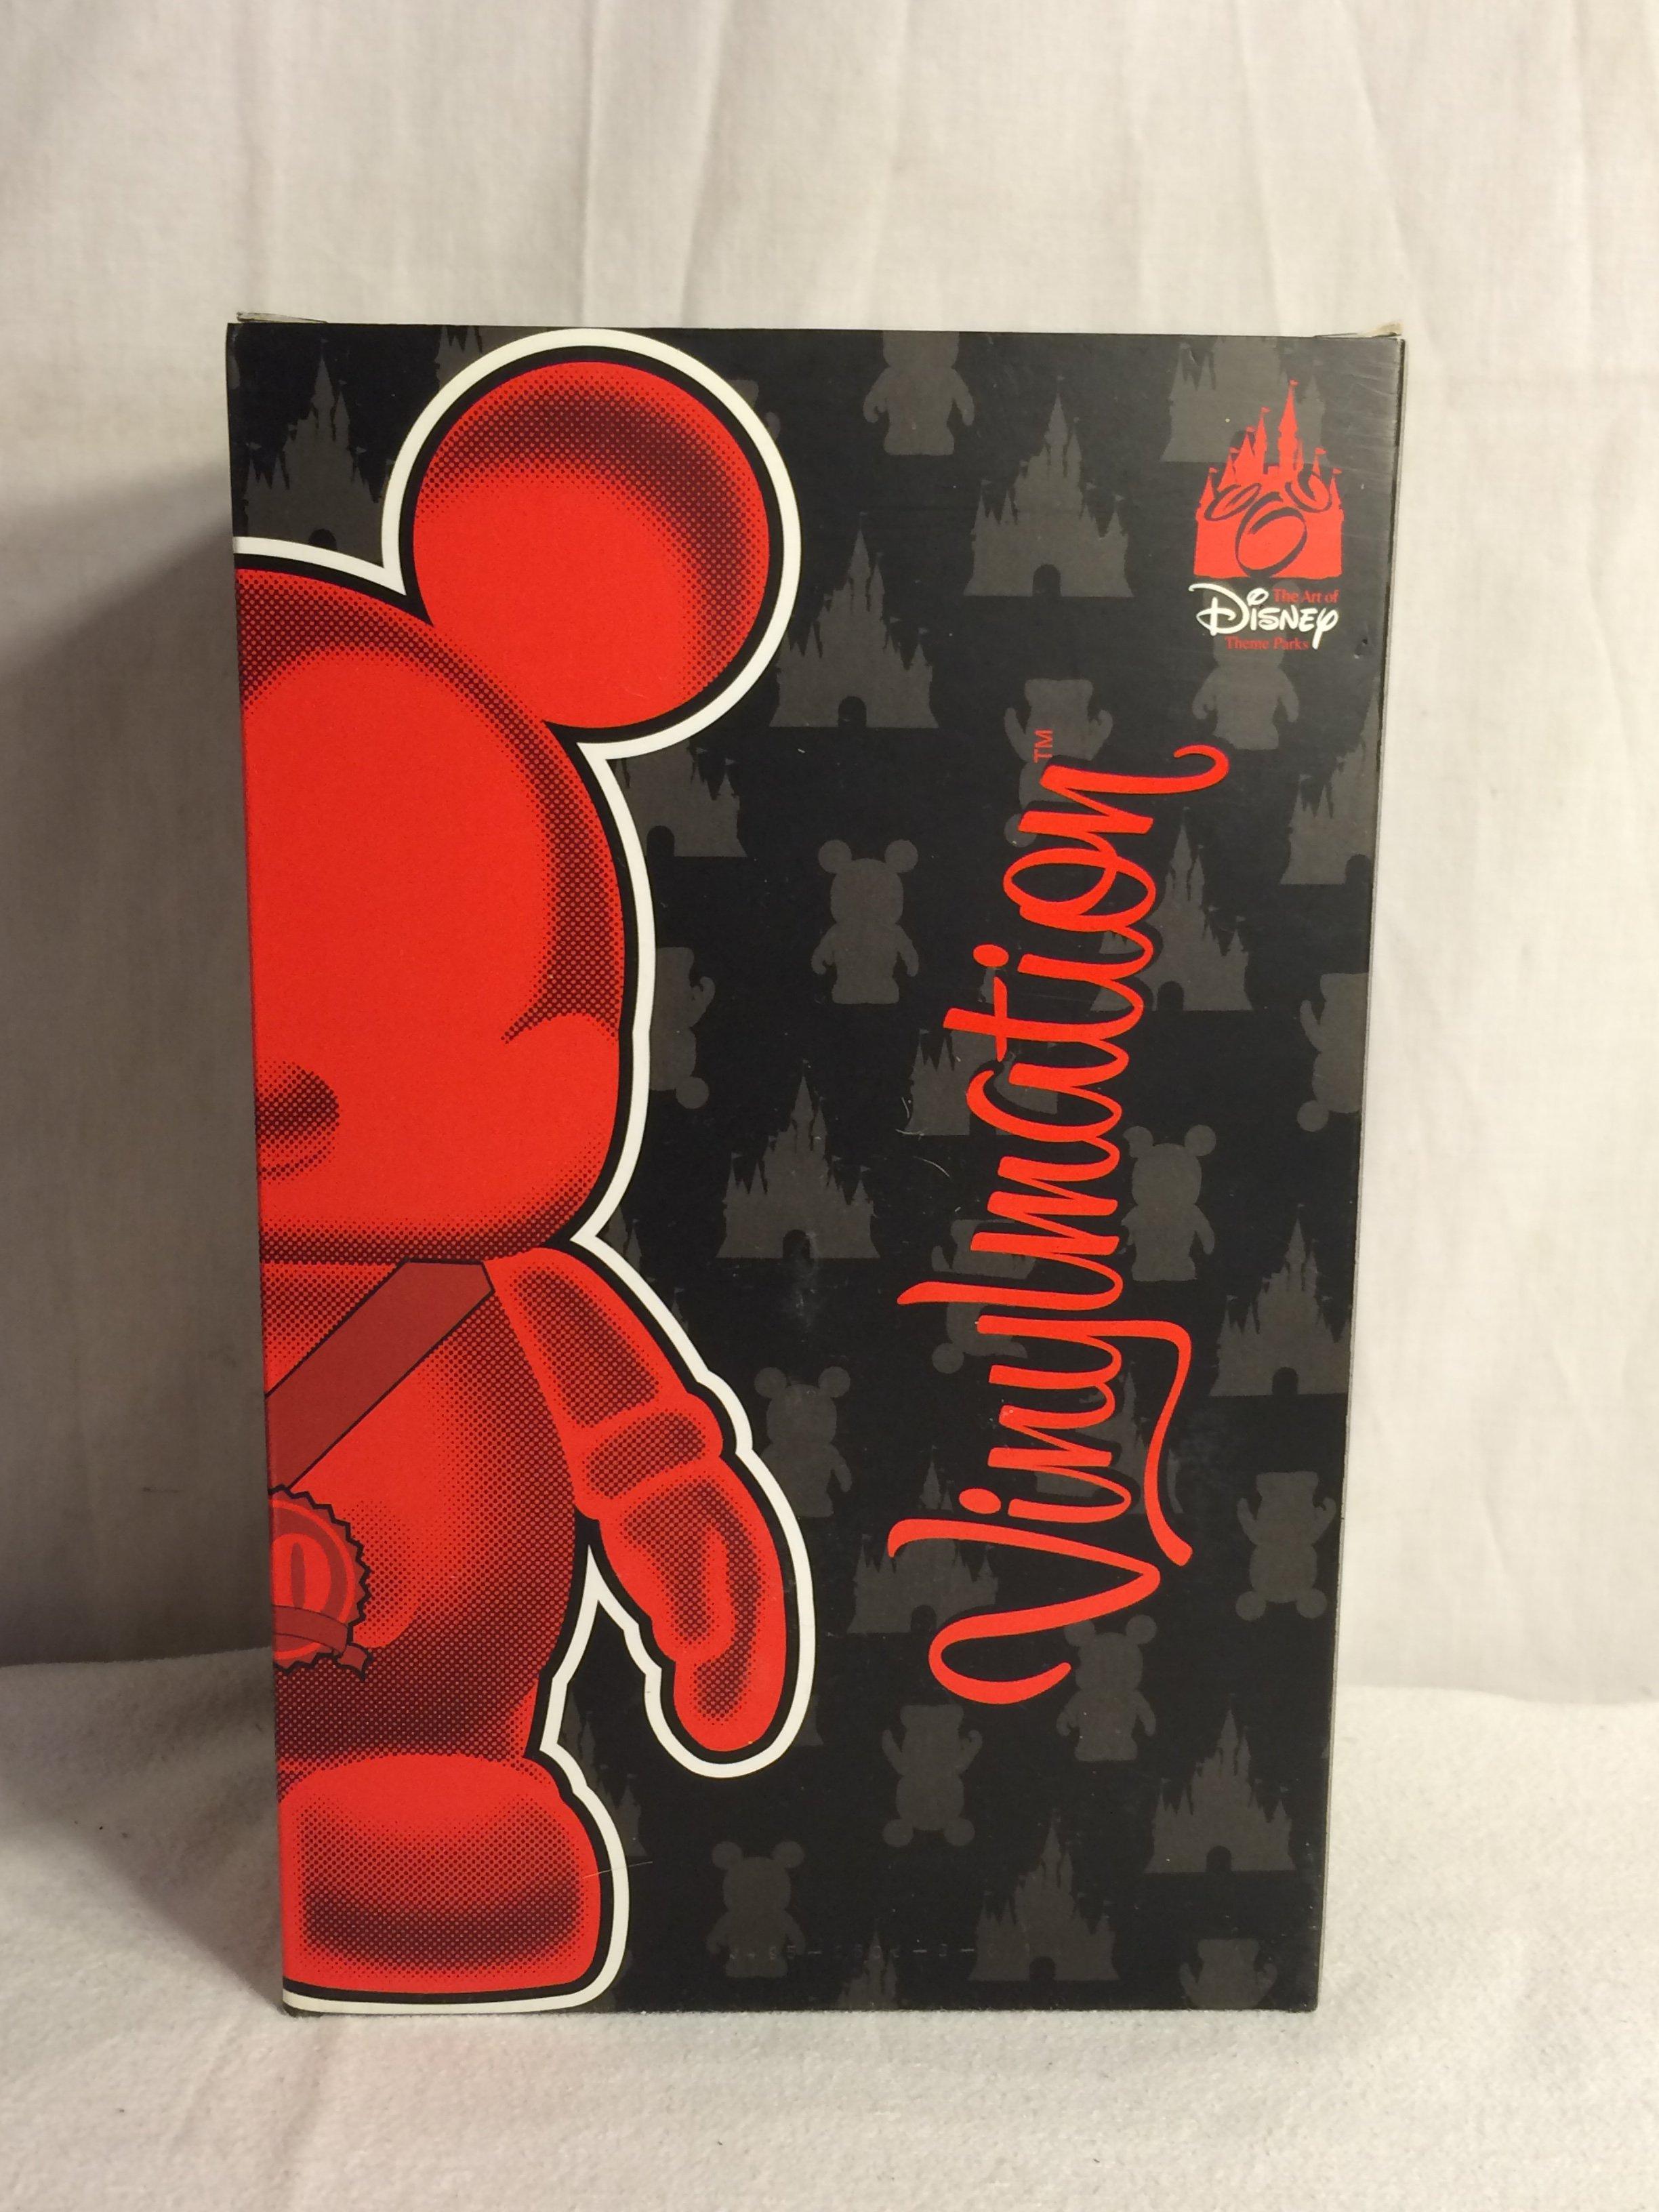 Collector Disney 10 Yrs Of Pin Trading Vinylmation Figure 9" Limited Edition of 950 Pcs 6.3/4BY 10.5